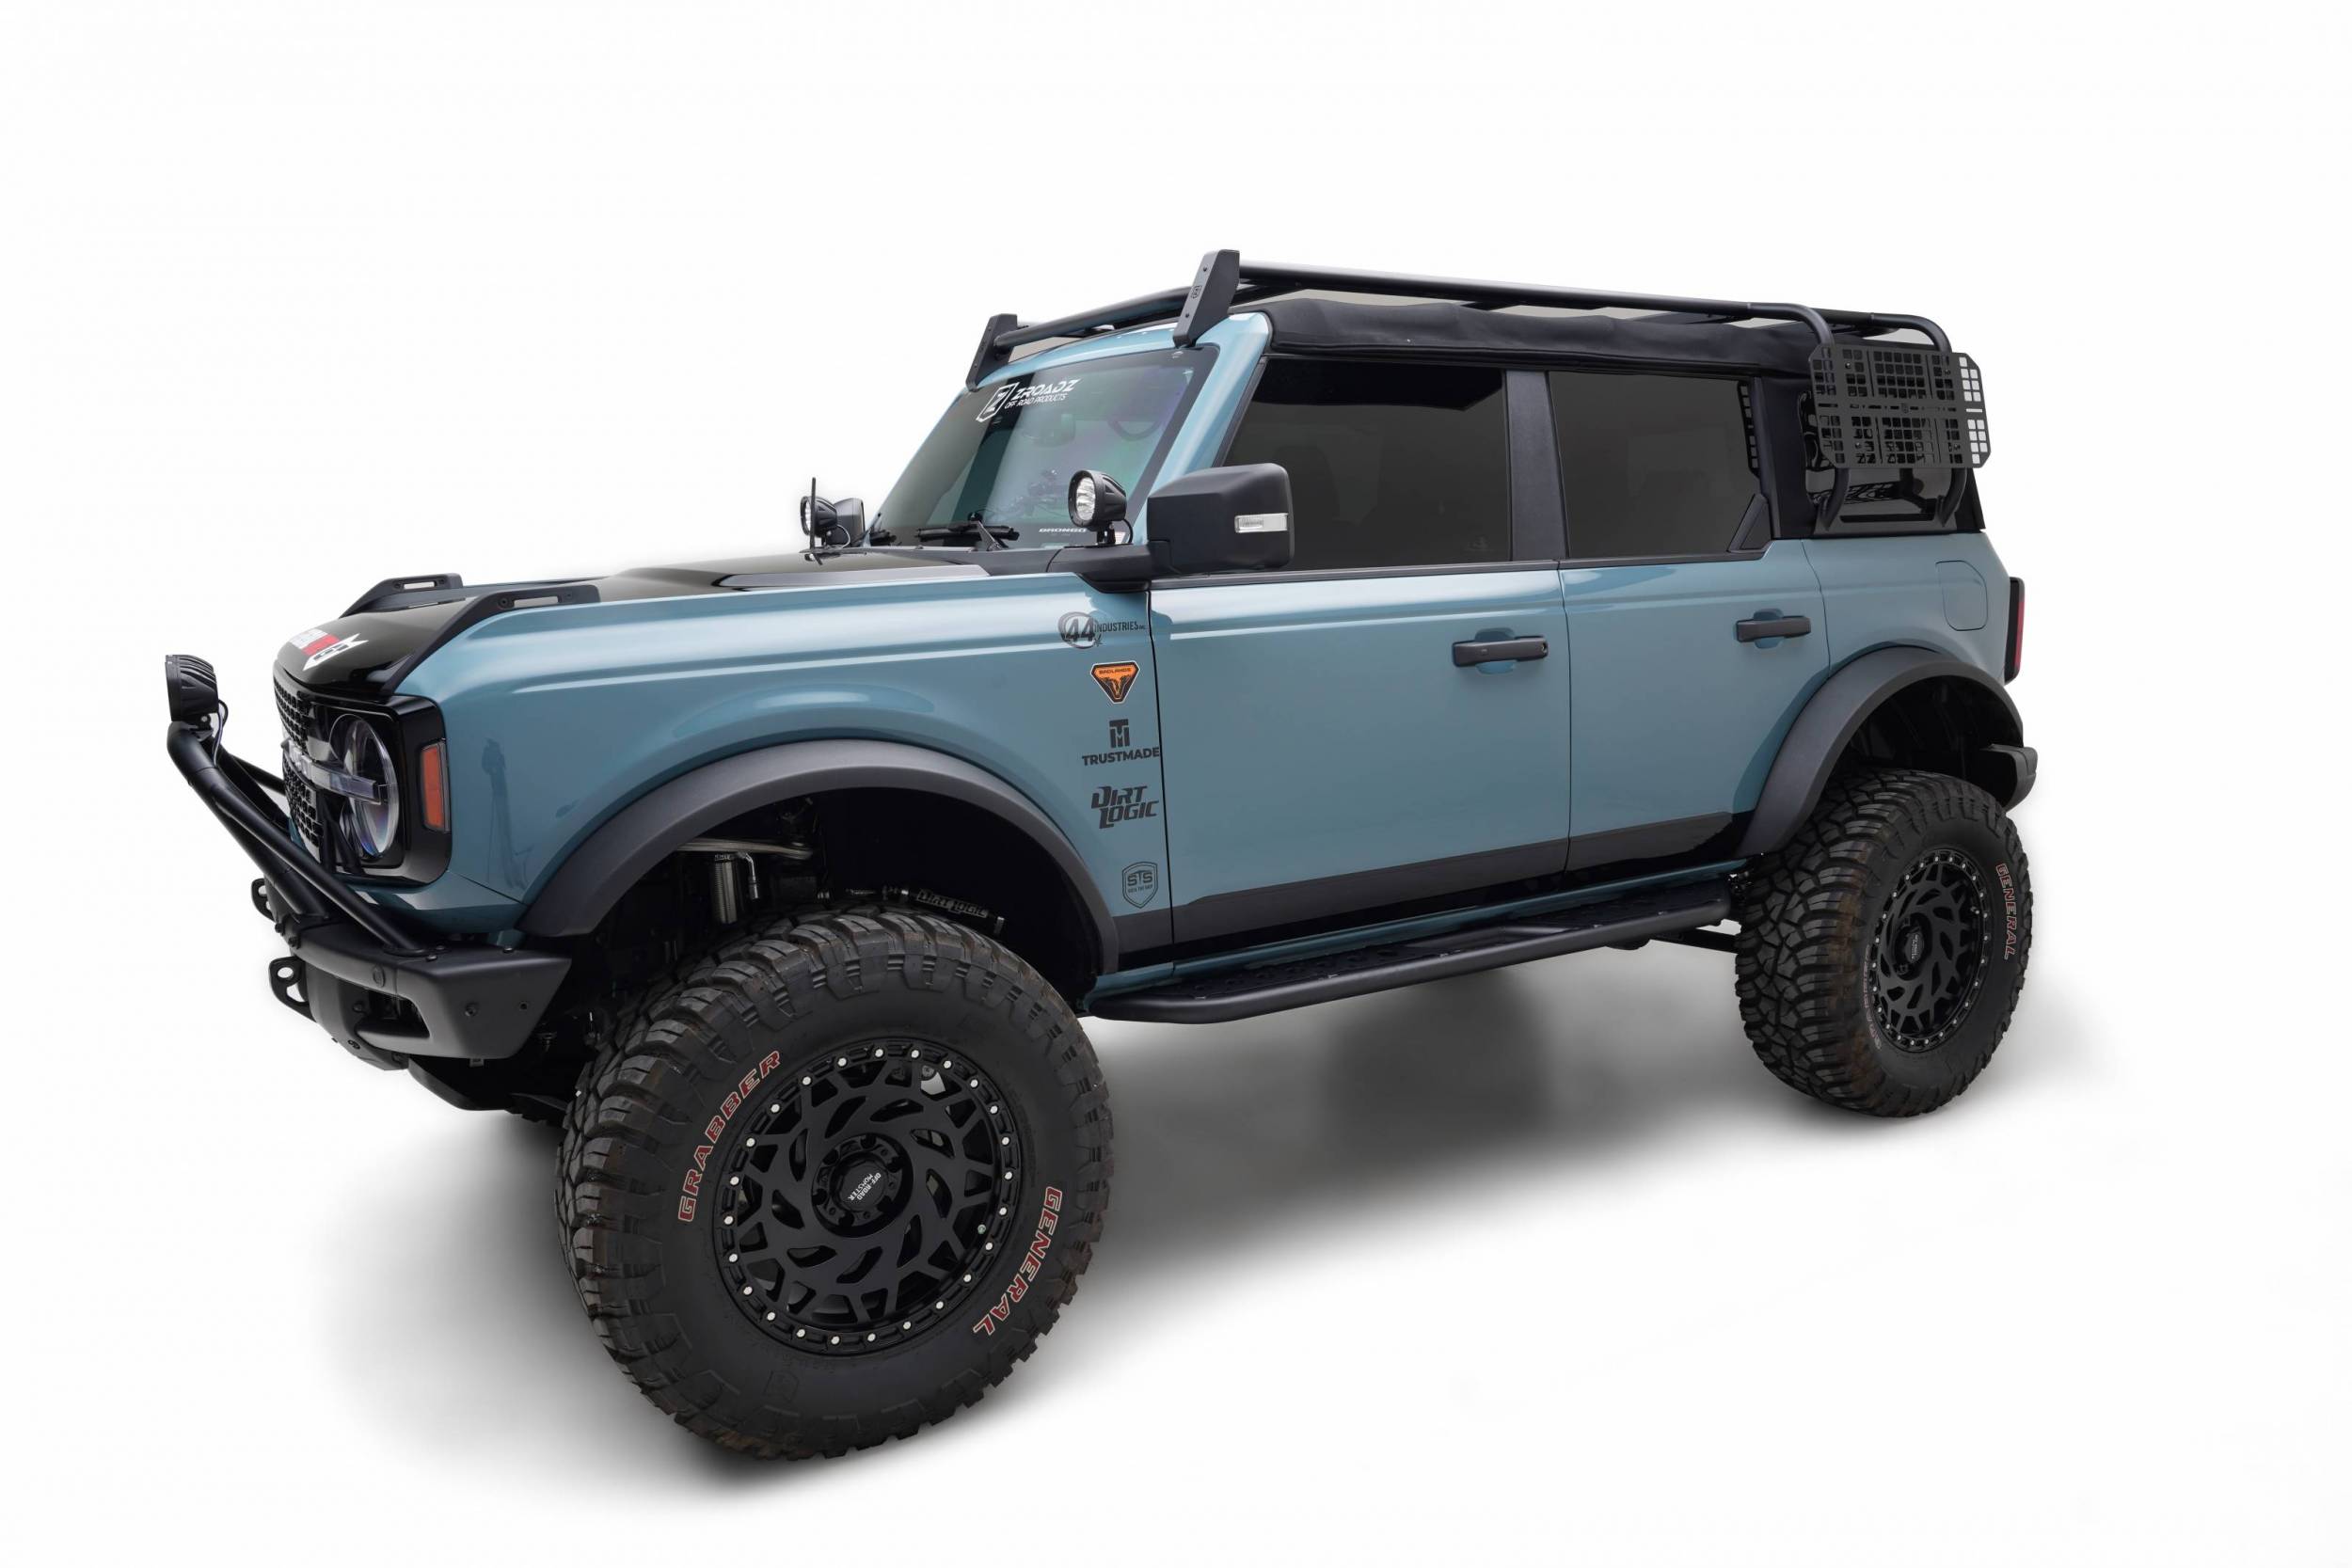 Ford Bronco Updated Soft Top Rack Images - ZROADZ OffRoad Ford Bronco Soft Top Rack_LG MOLLE